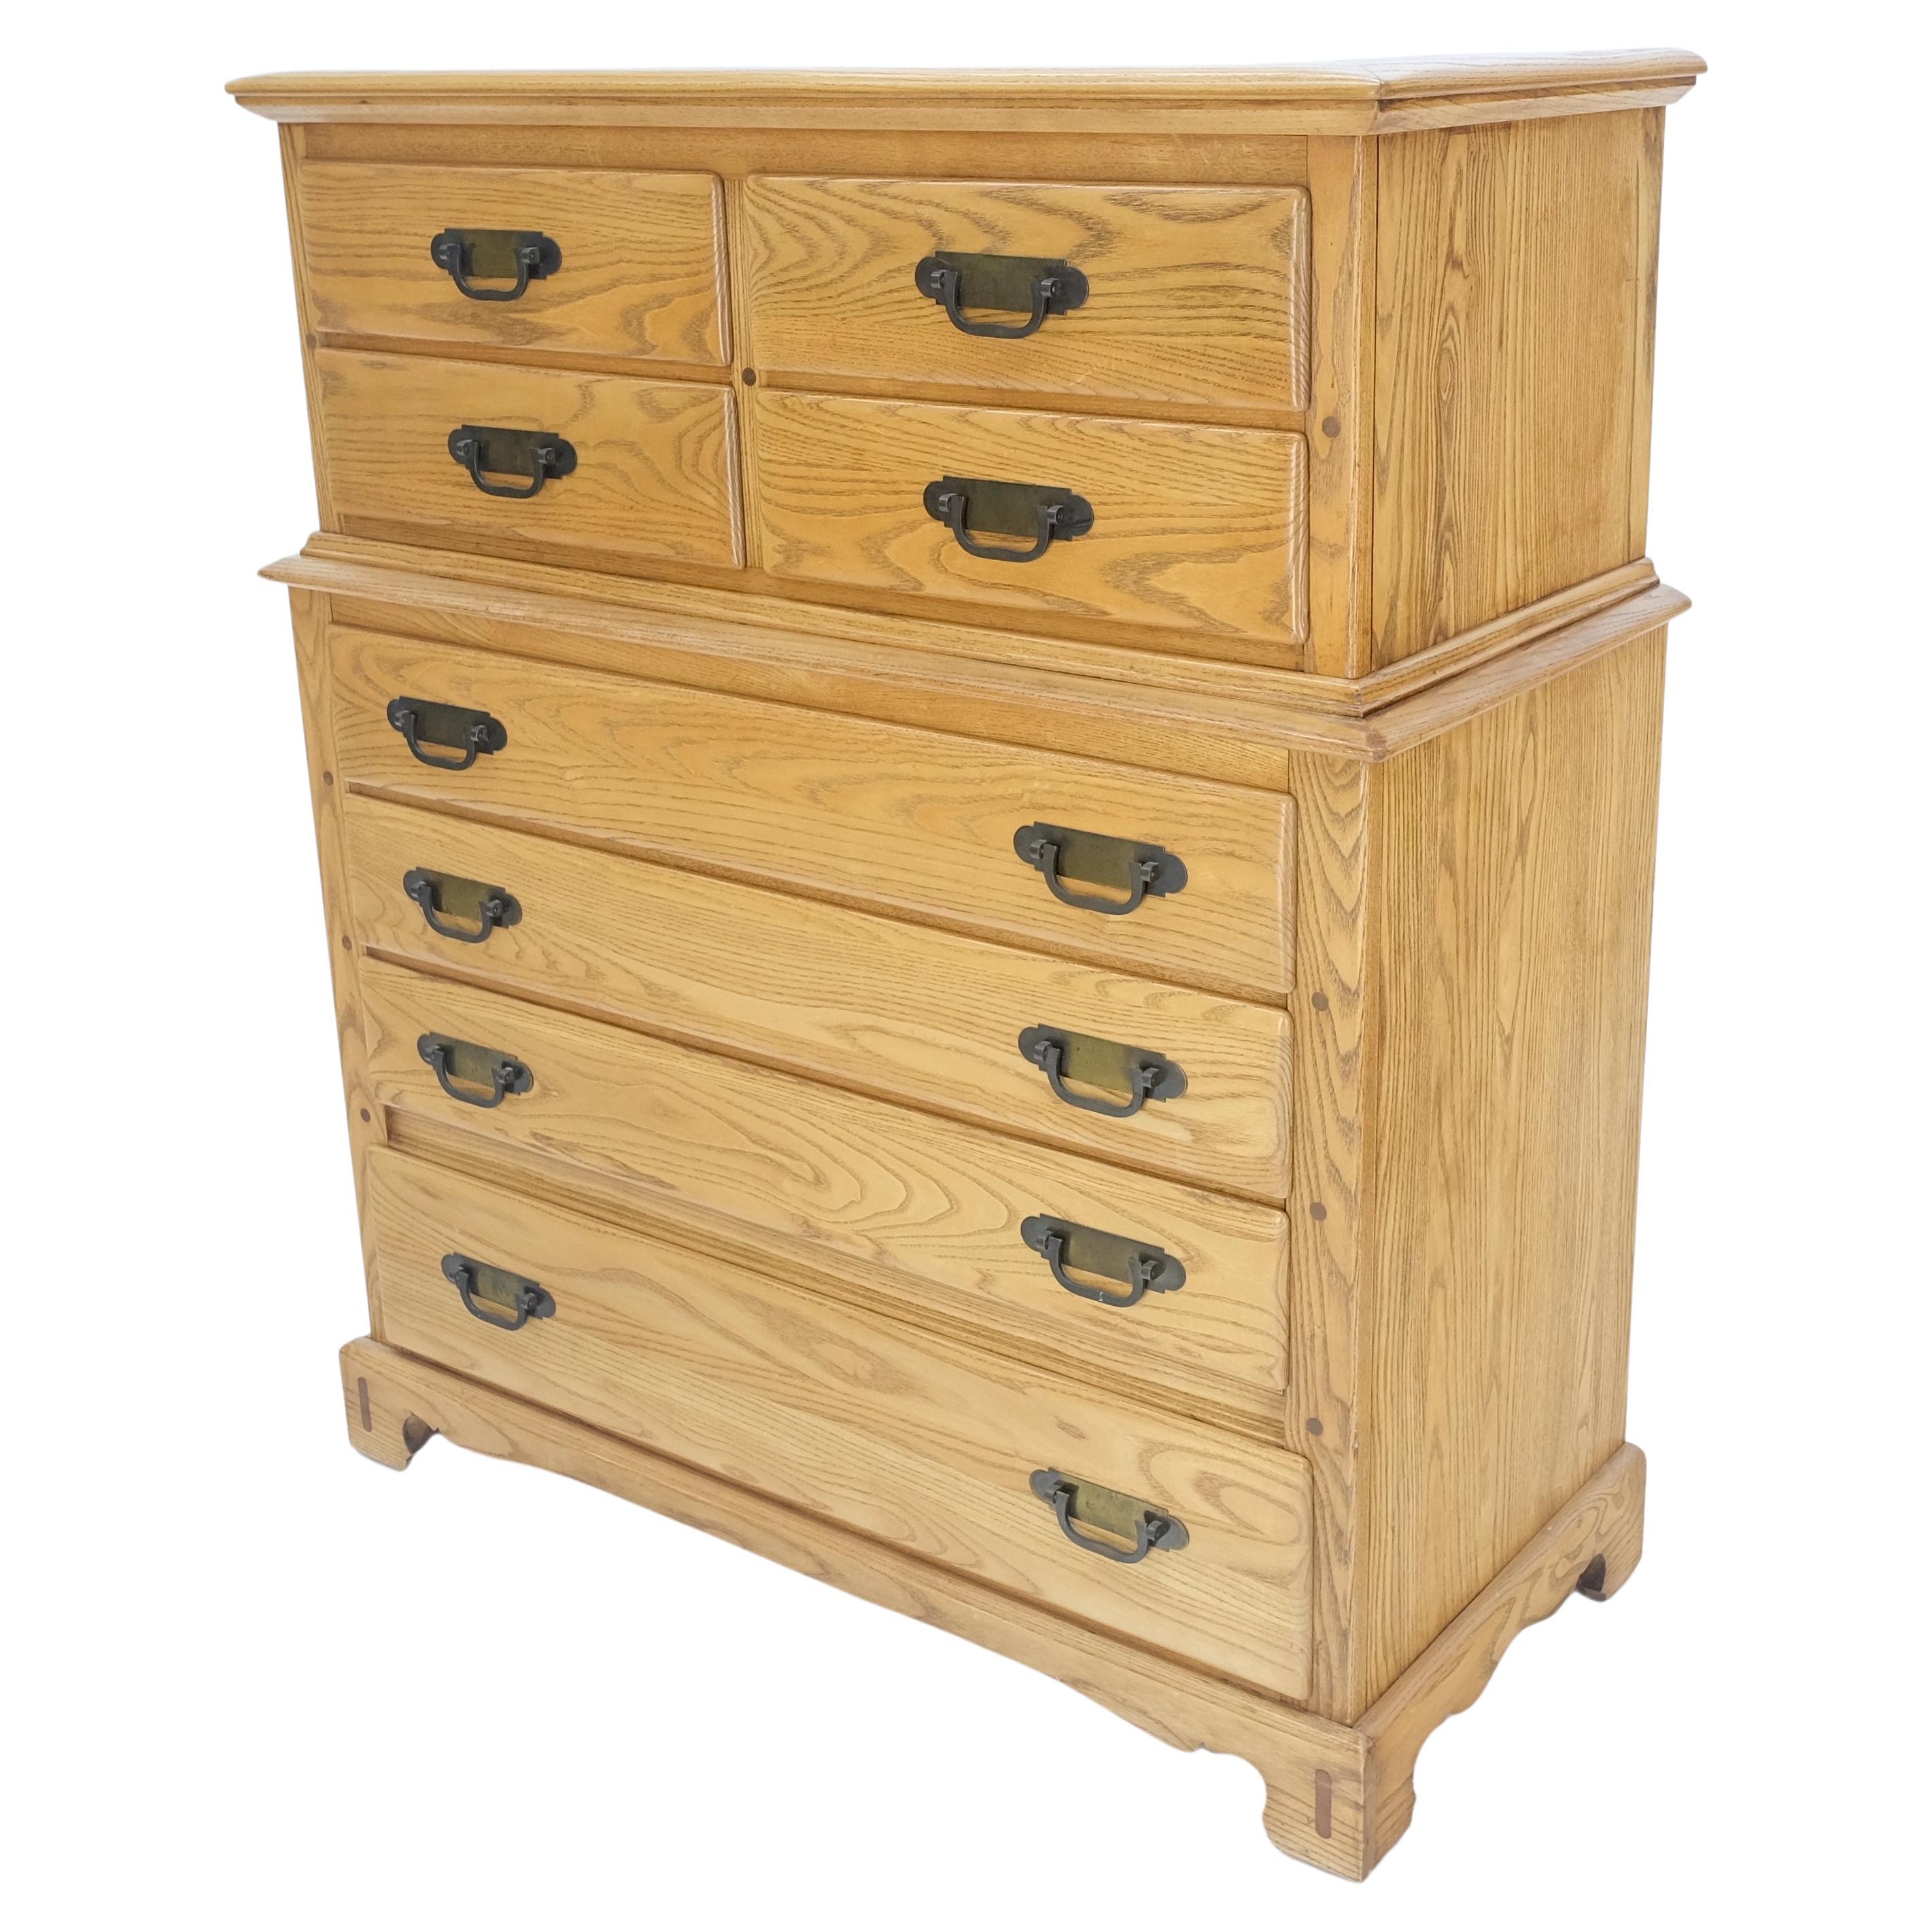 Lacquered Solid Chestnut 8 Drawers High Chest Dresser Phenomenal Craftsmanship MINT! For Sale